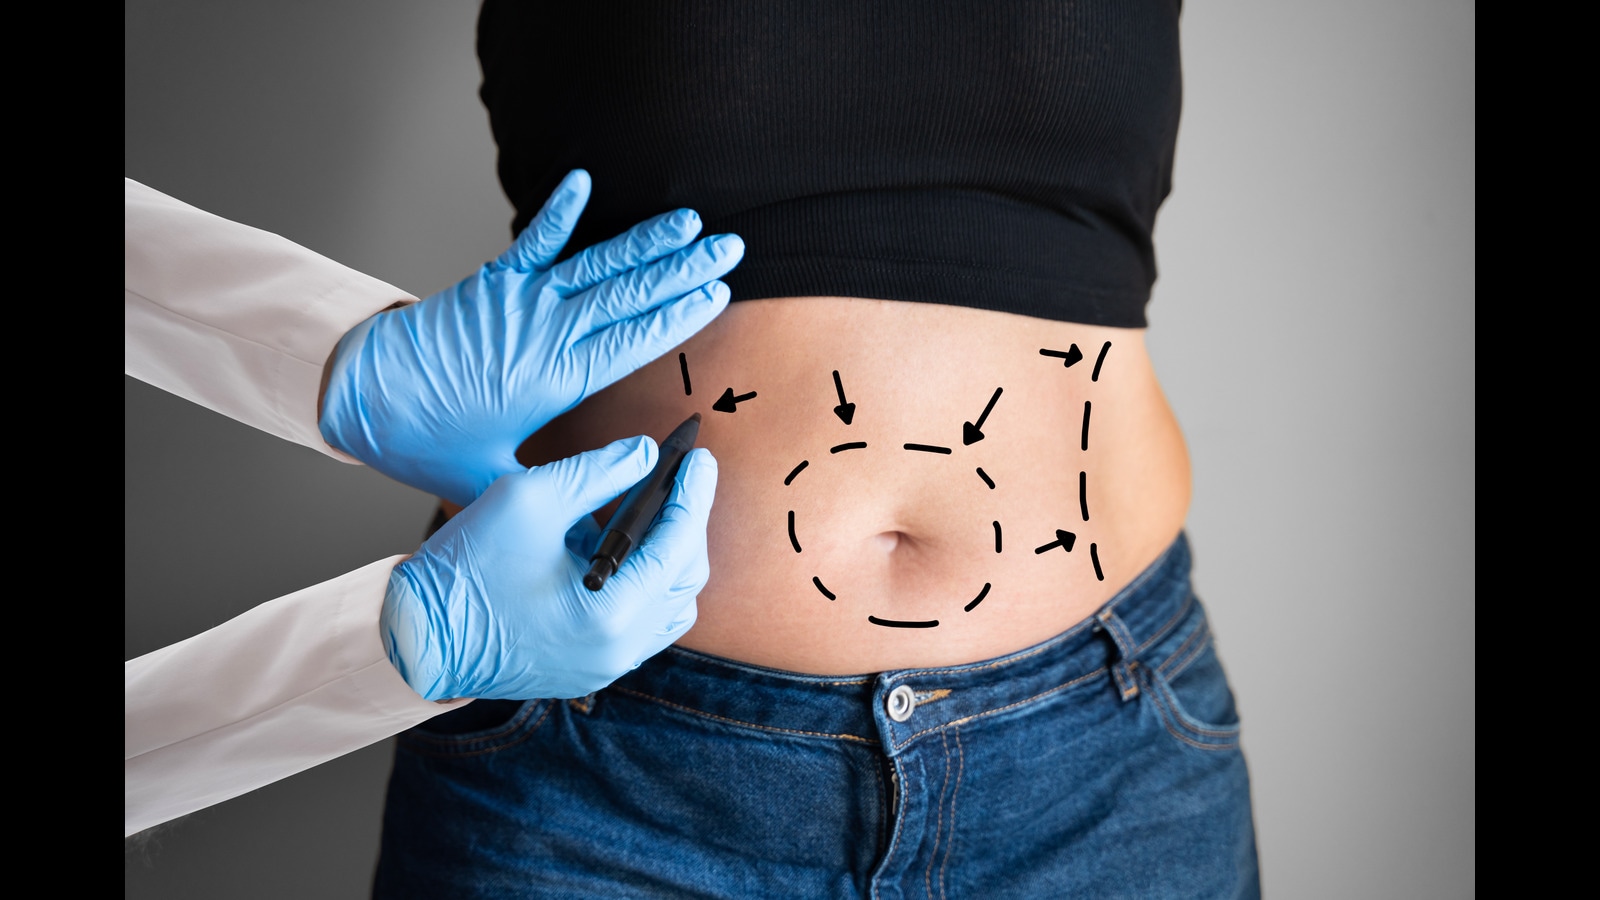 Liposuction: is it really worth the risk?